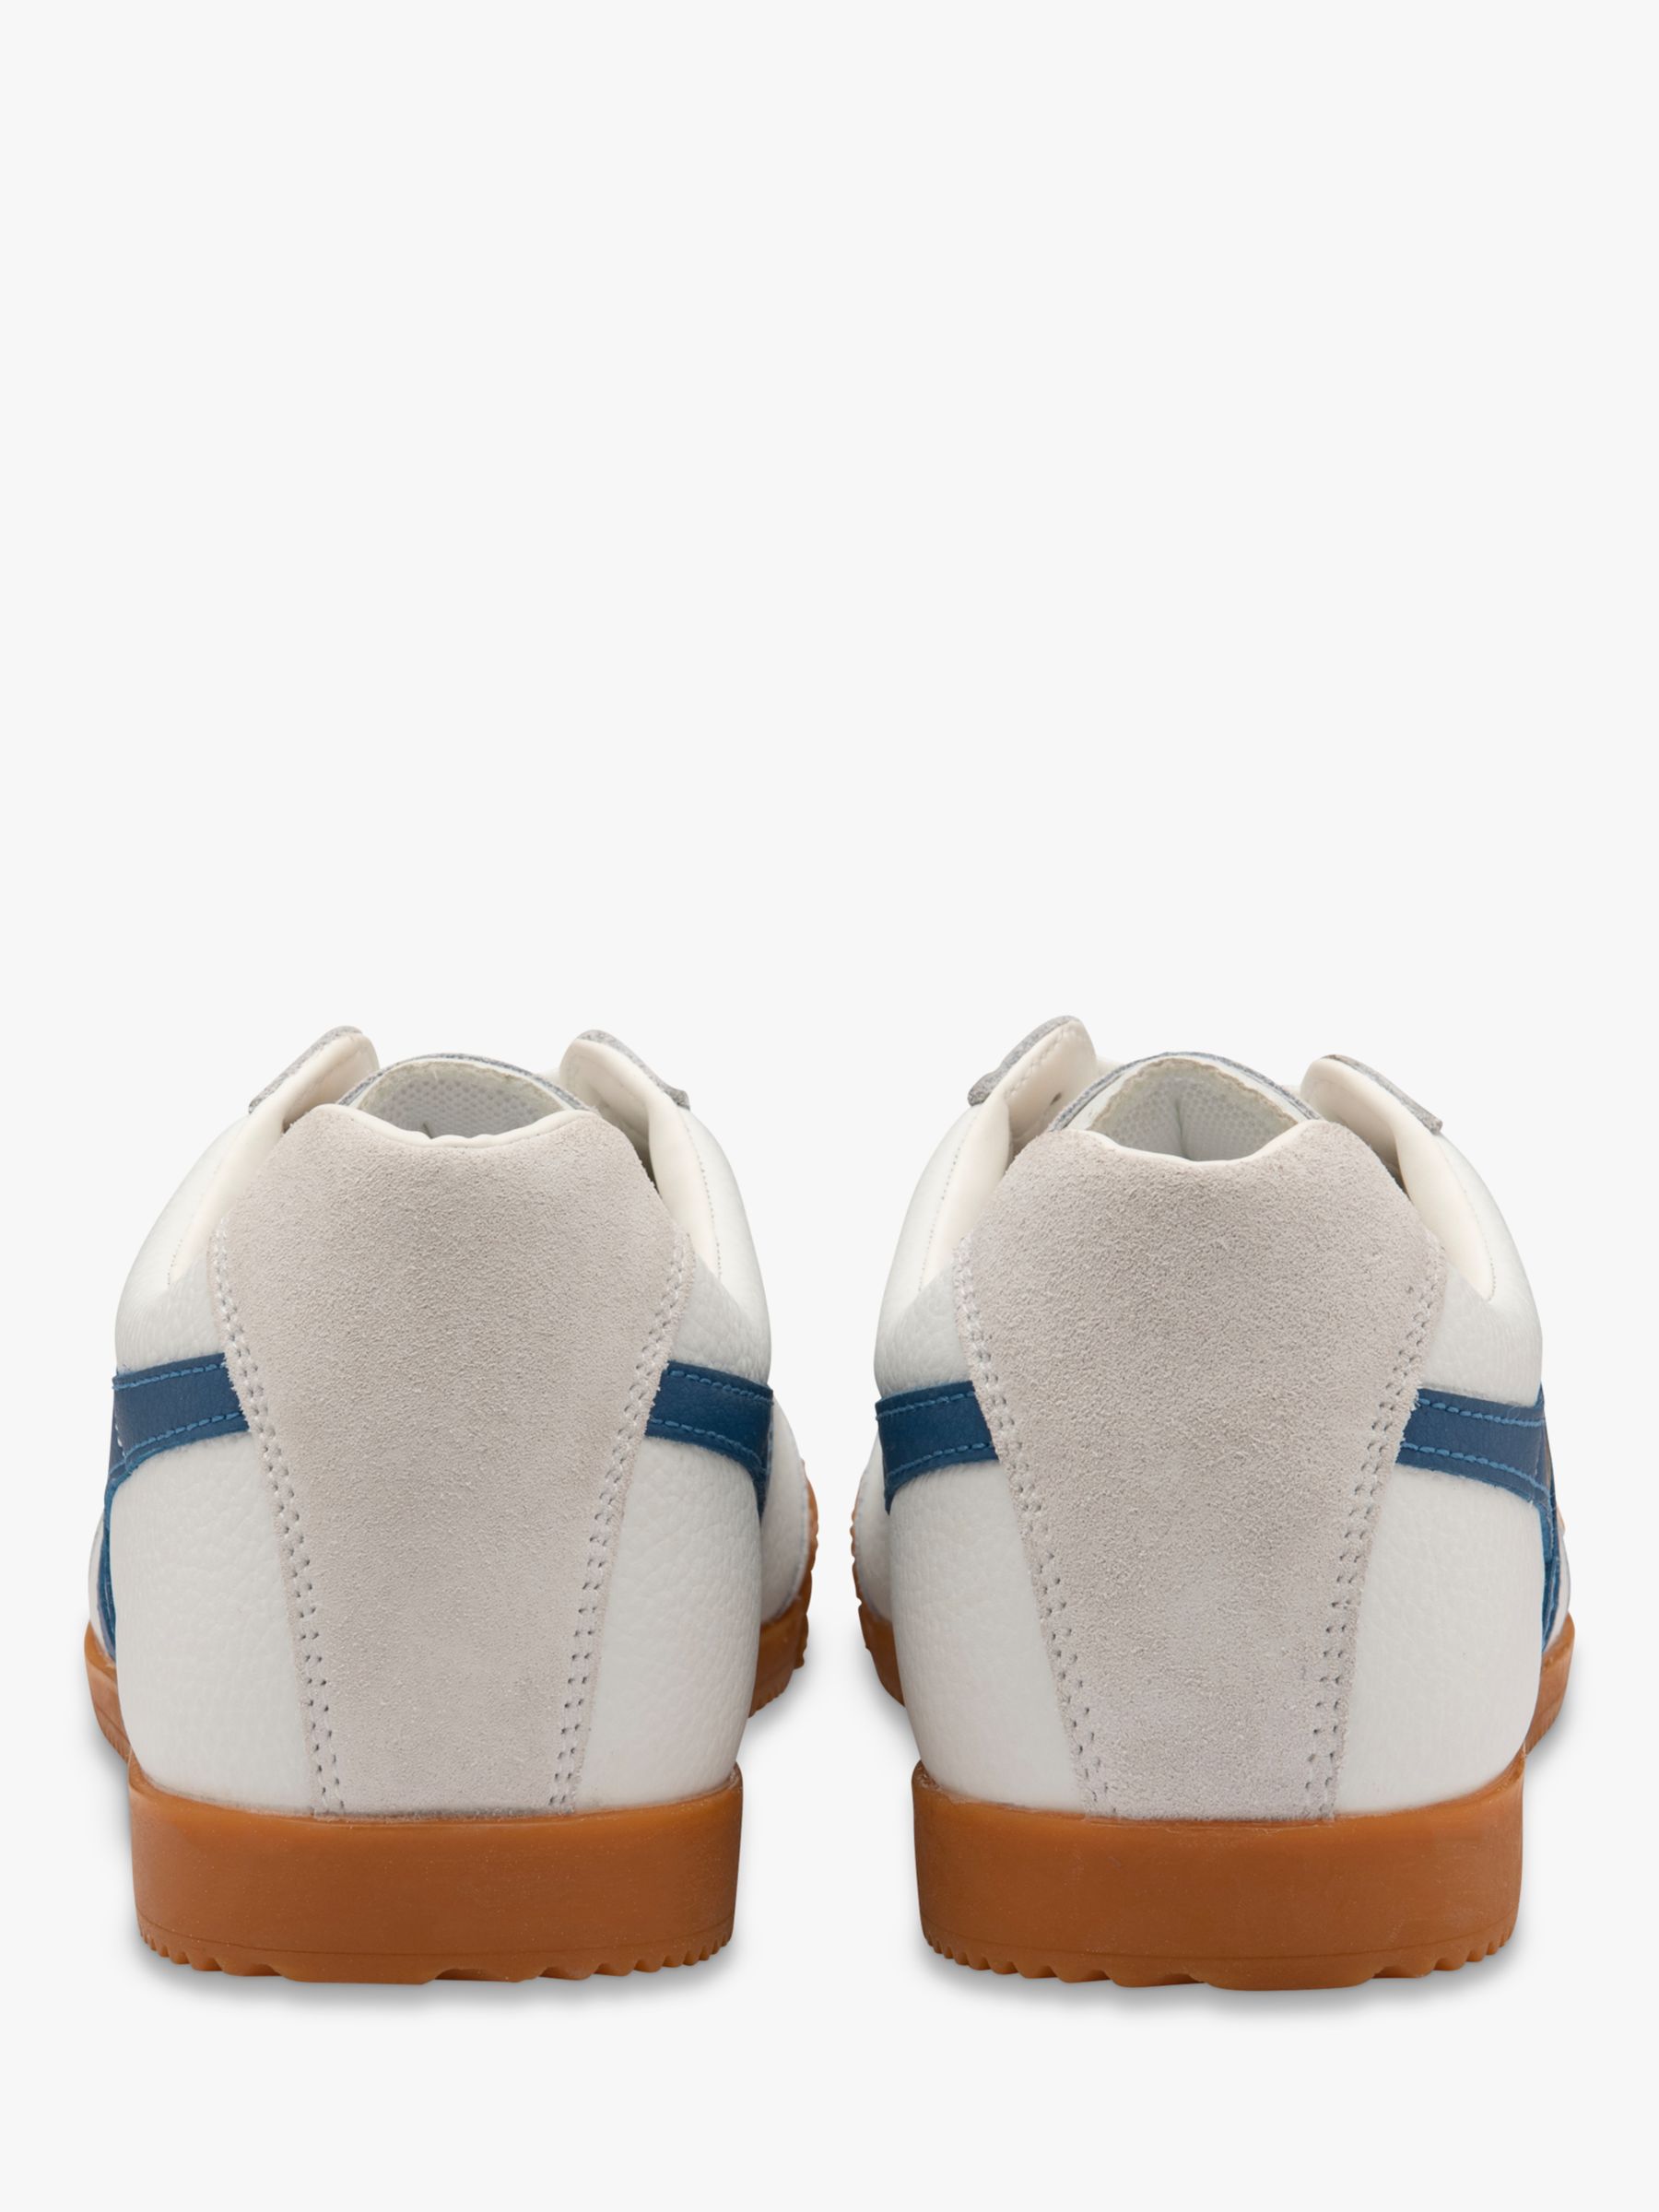 Buy Gola Classics Harrier Leather Lace Up Trainers, White/Marine Blue Online at johnlewis.com